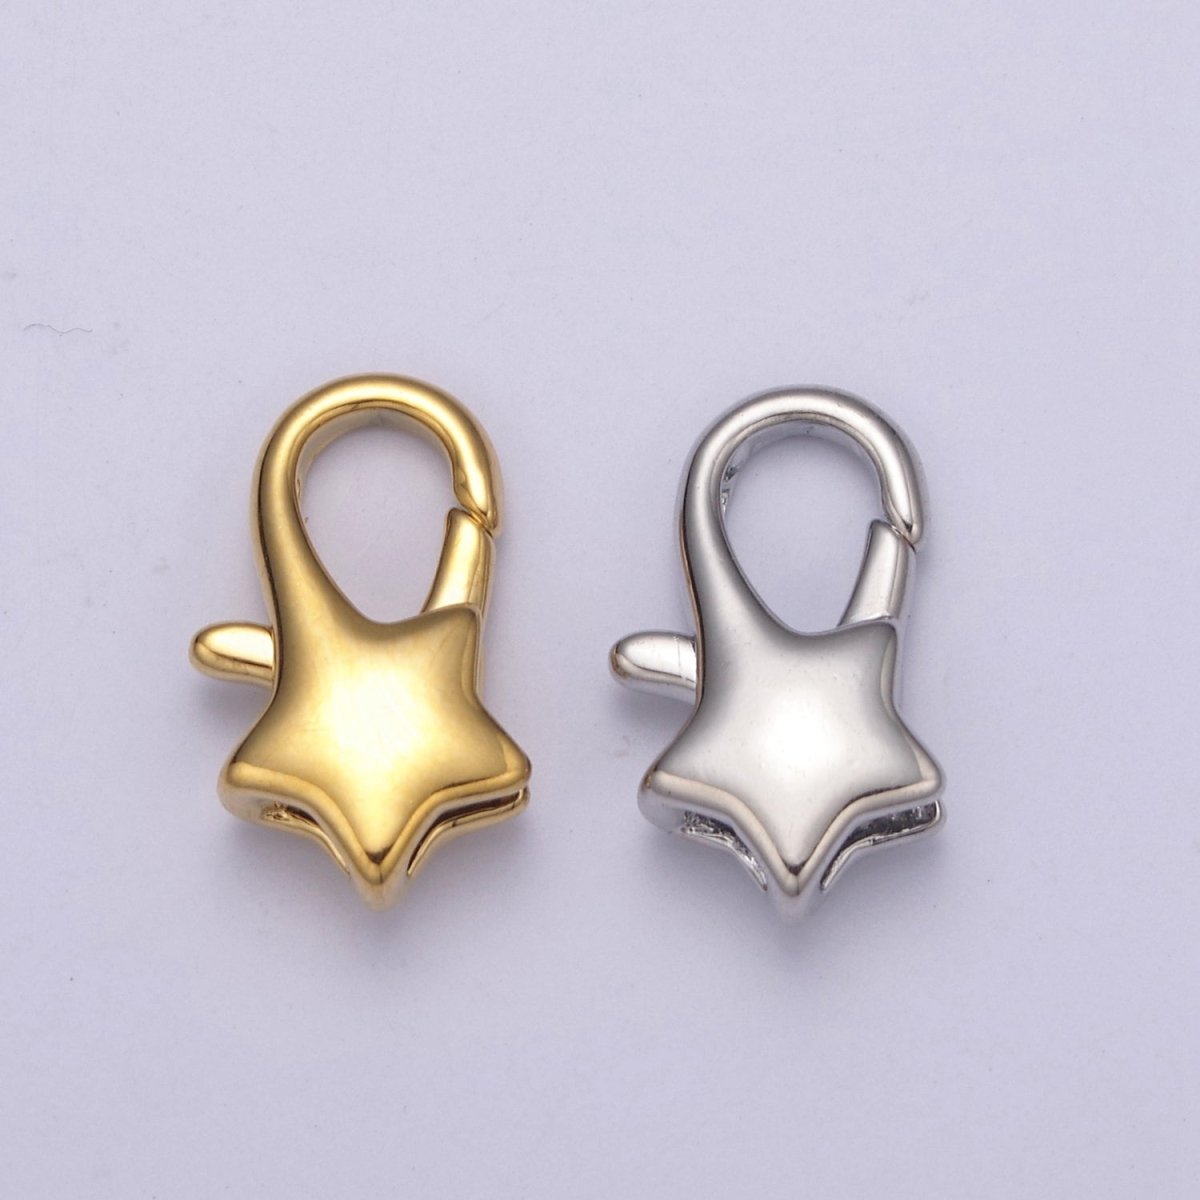 Gold Filled Star Lobster Clasp Tiny Star Trigger Clasp – Celestial Lobster Claw for Jewelry Making Supplies L-582 L-583 L-590 L-591 - DLUXCA